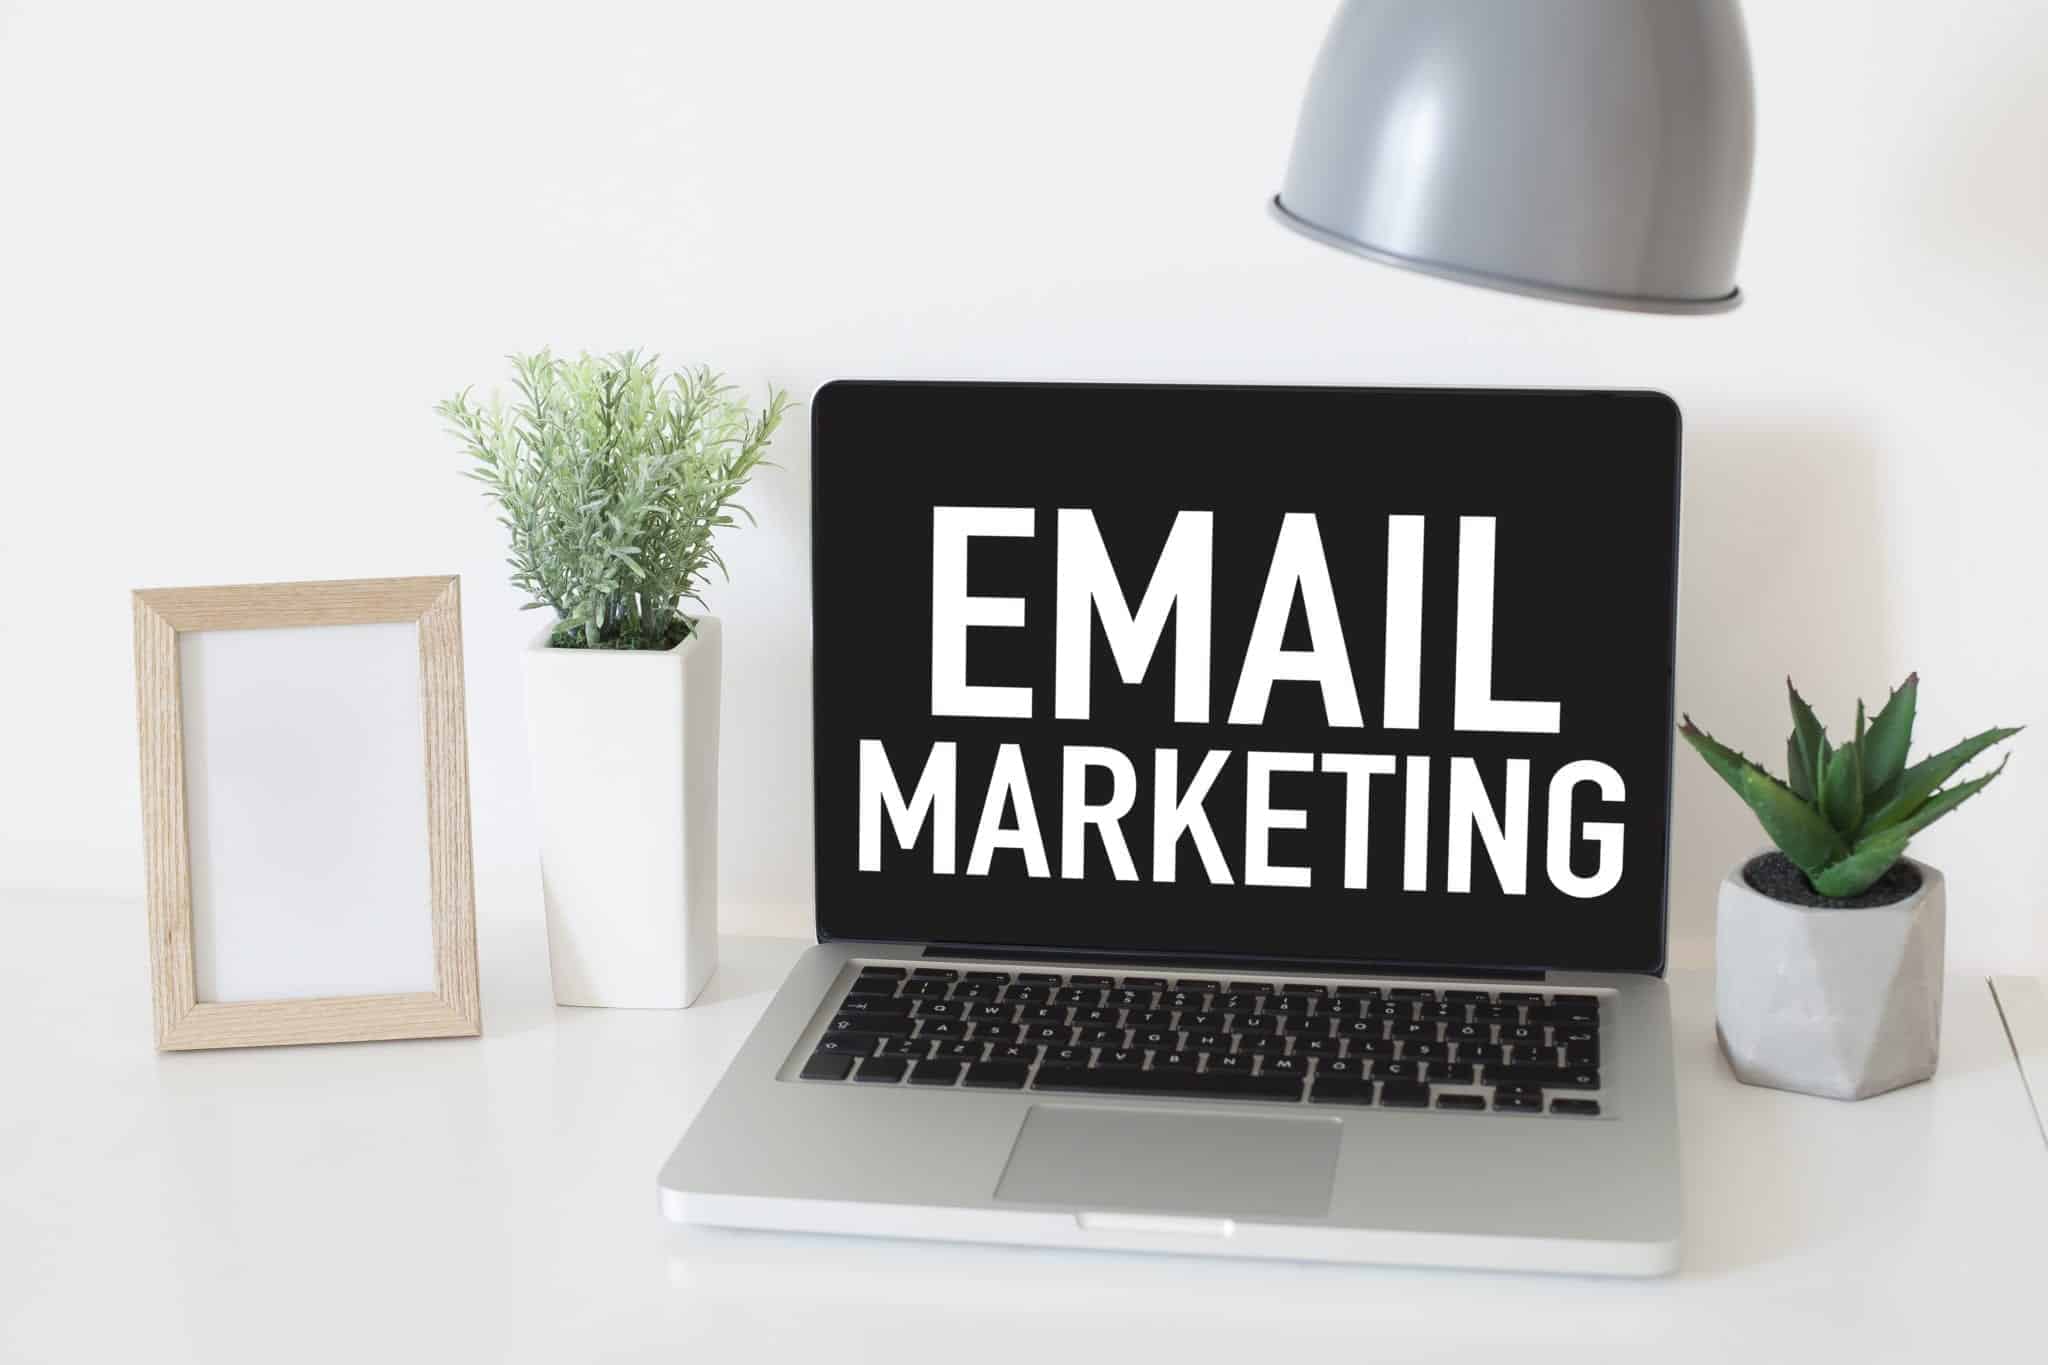 How email marketing can transform a small business.